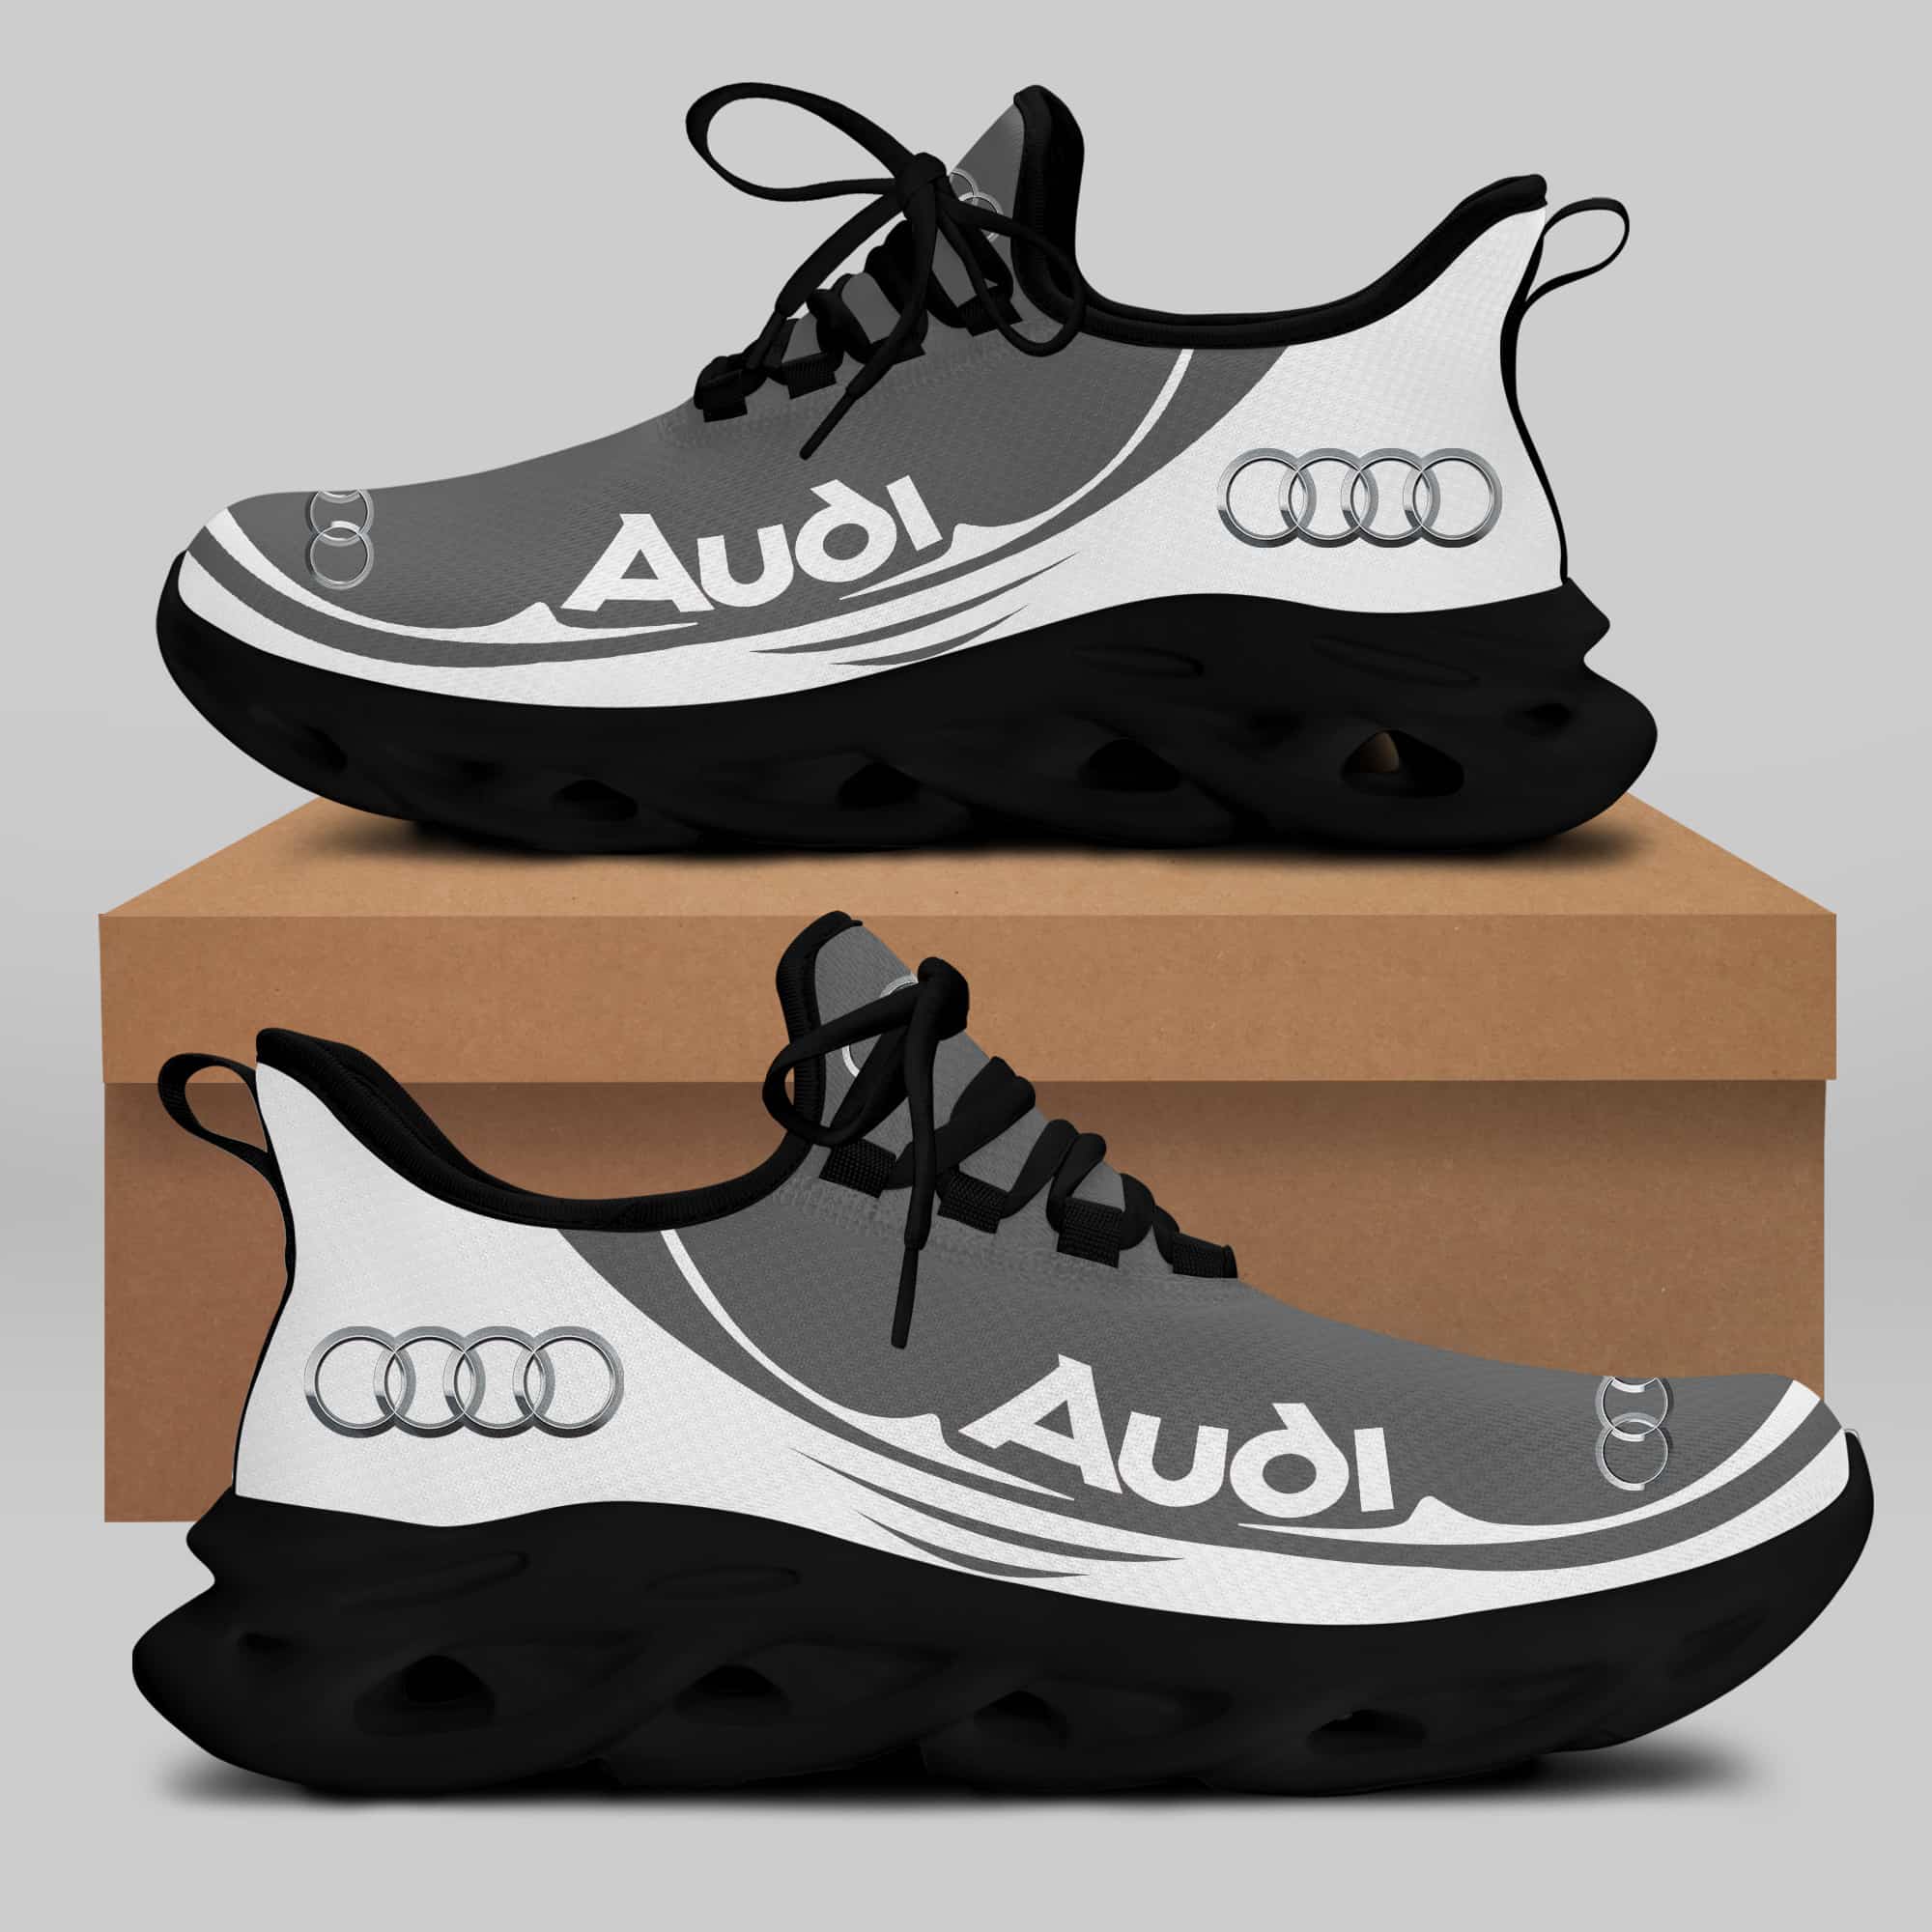 Audi Sport Running Shoes Max Soul Shoes Sneakers Ver 41 2